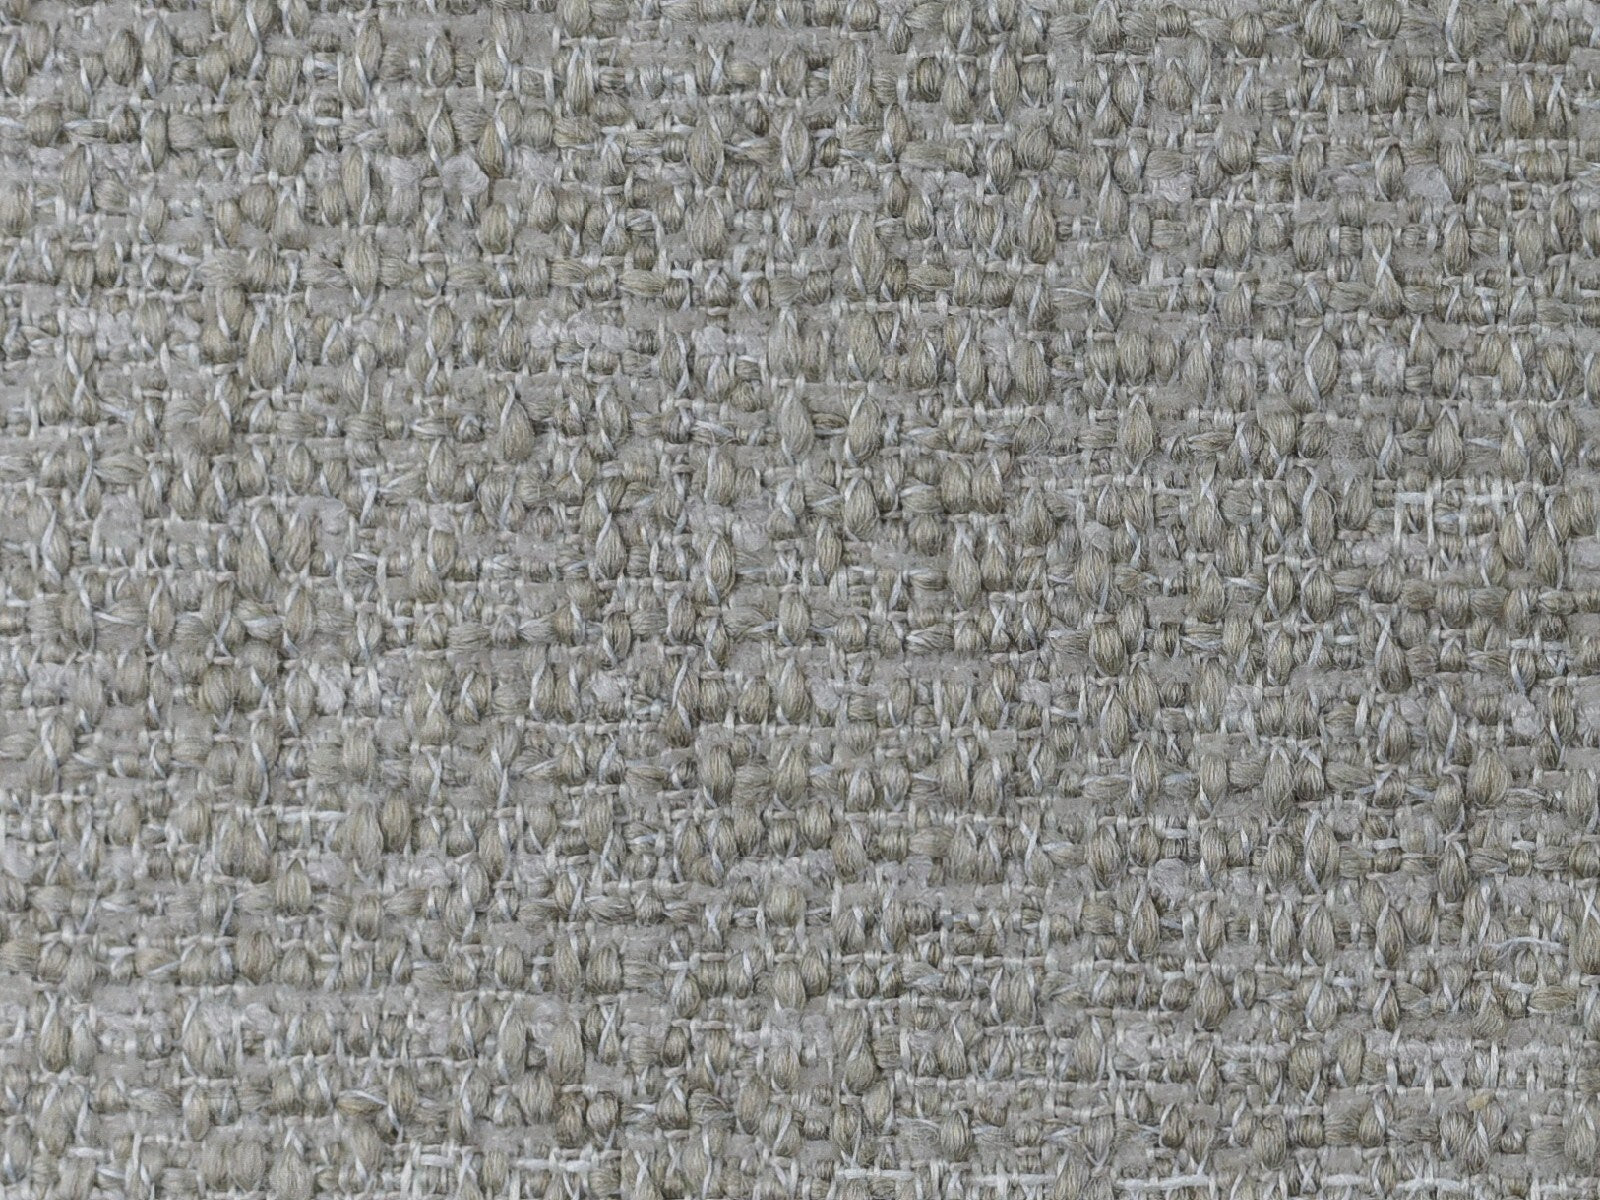 Contemporary Coarse Woven Textured Upholstery Fabric By The Yard 57"W/600GSM-Capability Cobblestone